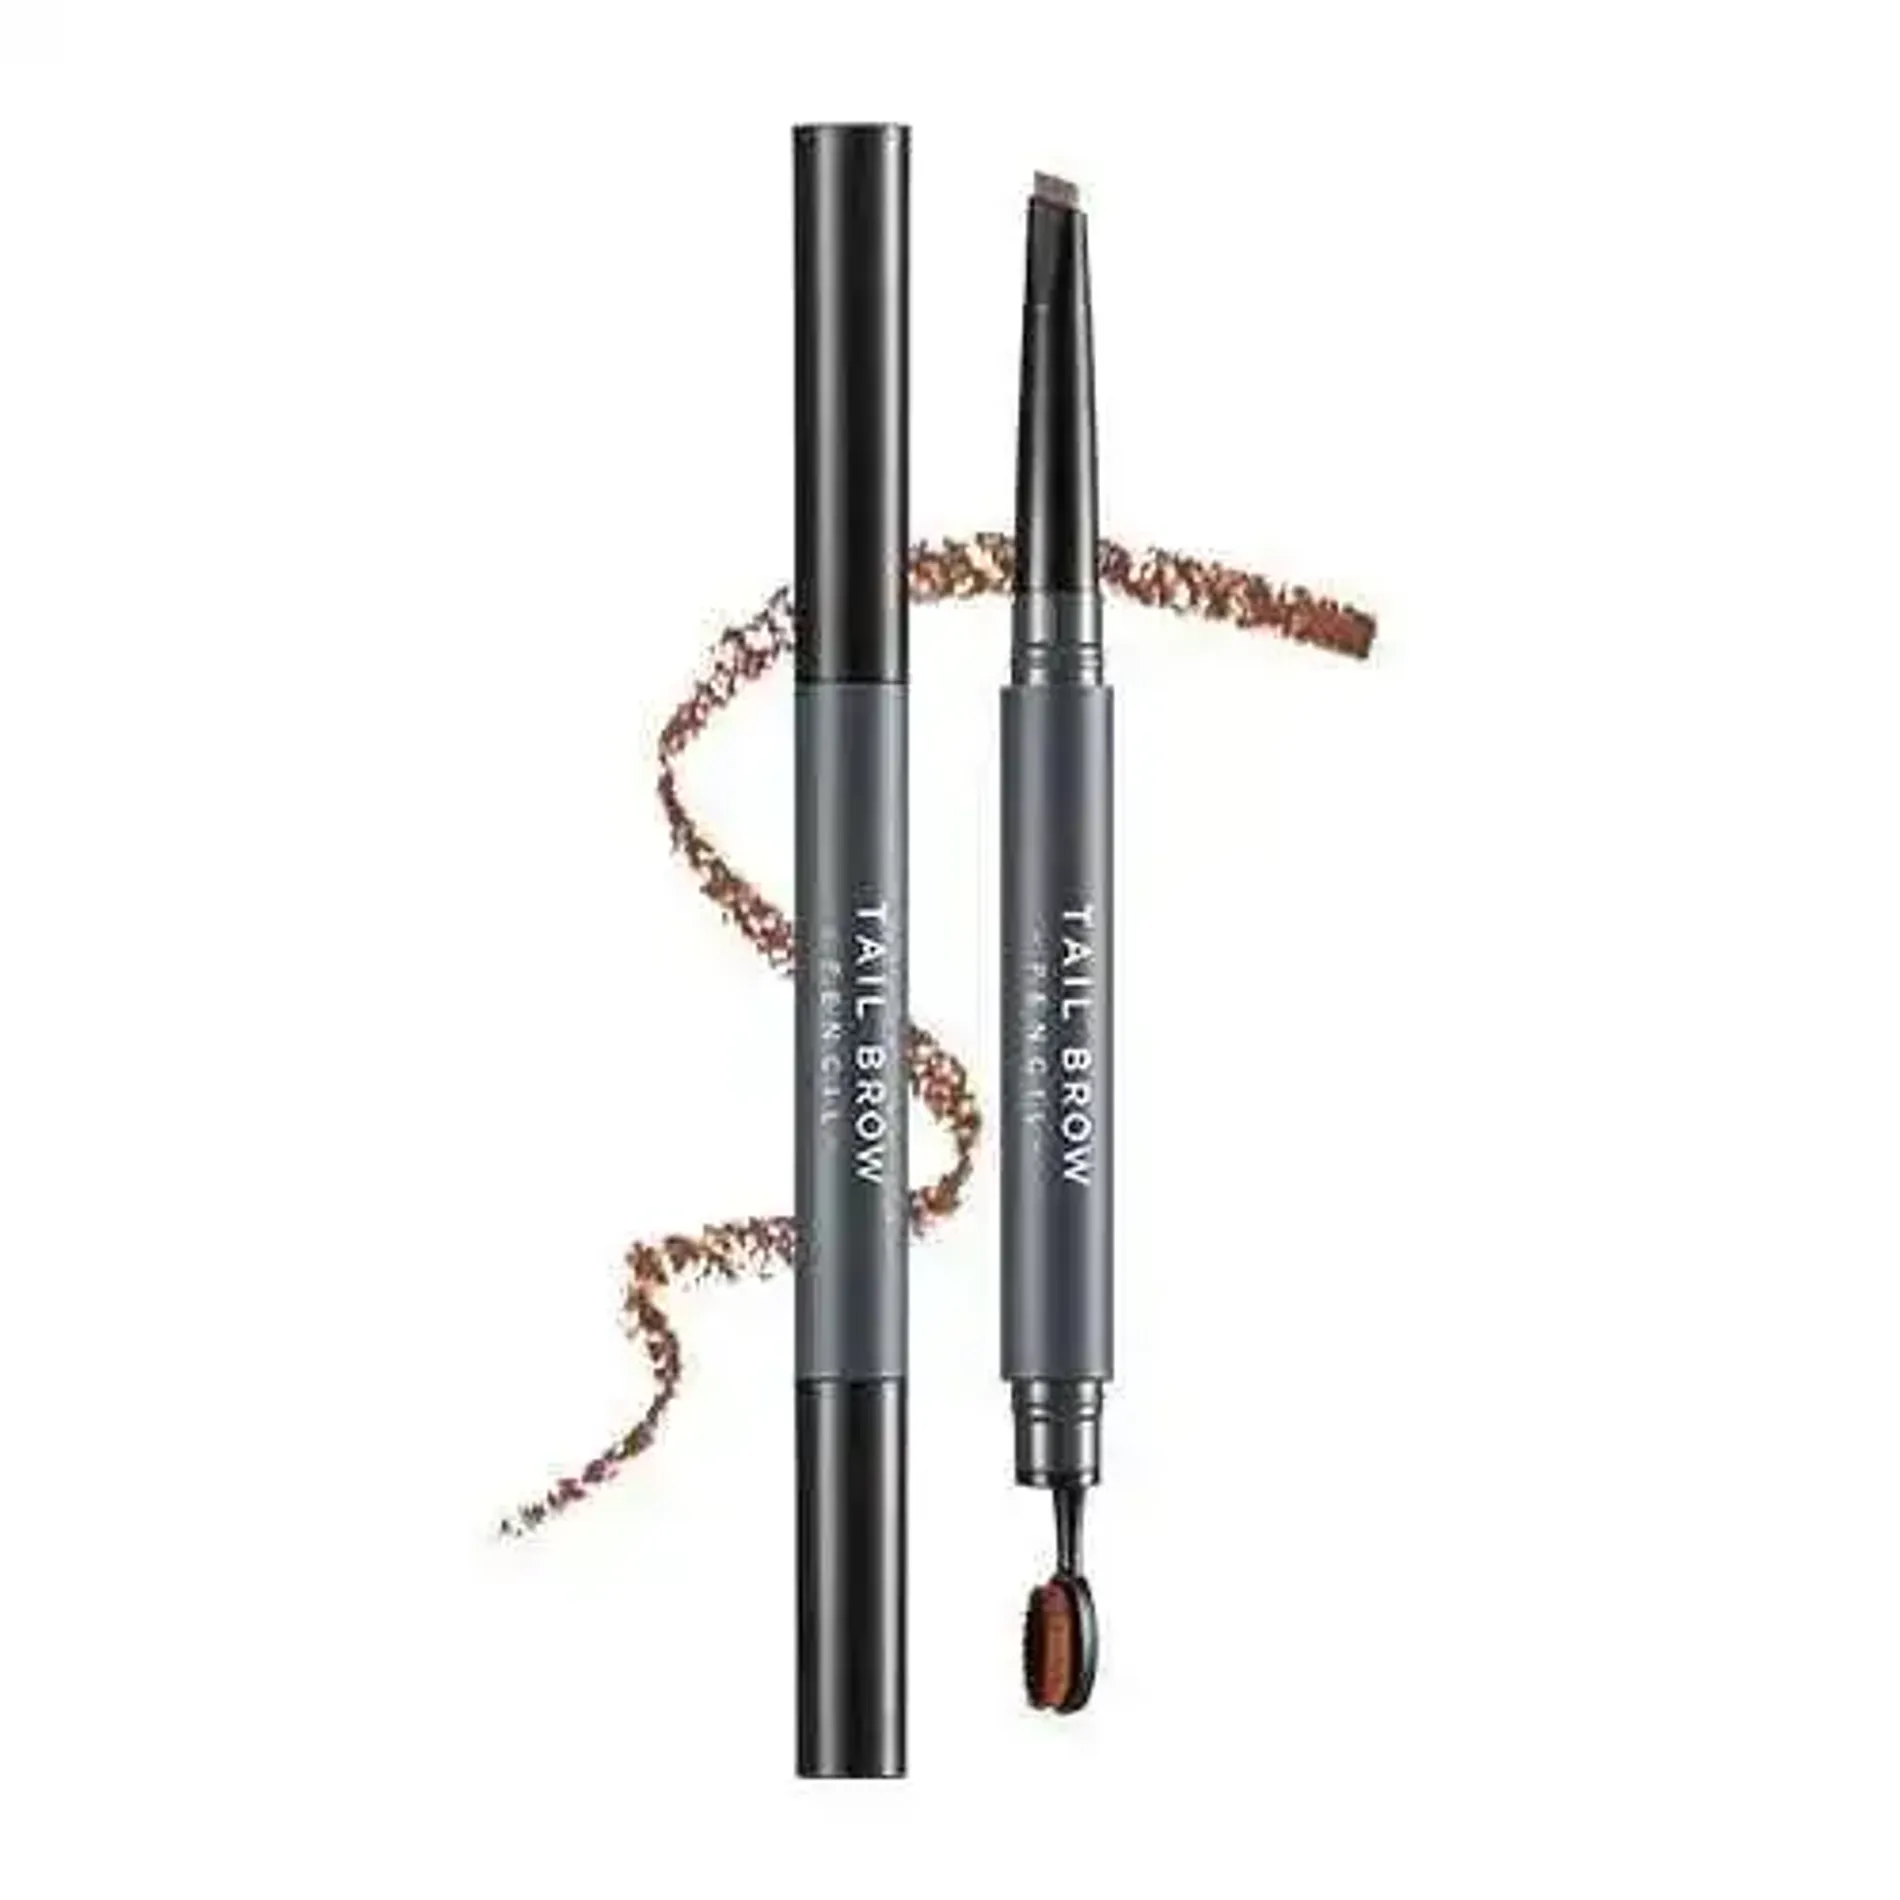 chi-chan-may-a-pieu-tail-brow-pencil-red-brown-0-3g-1